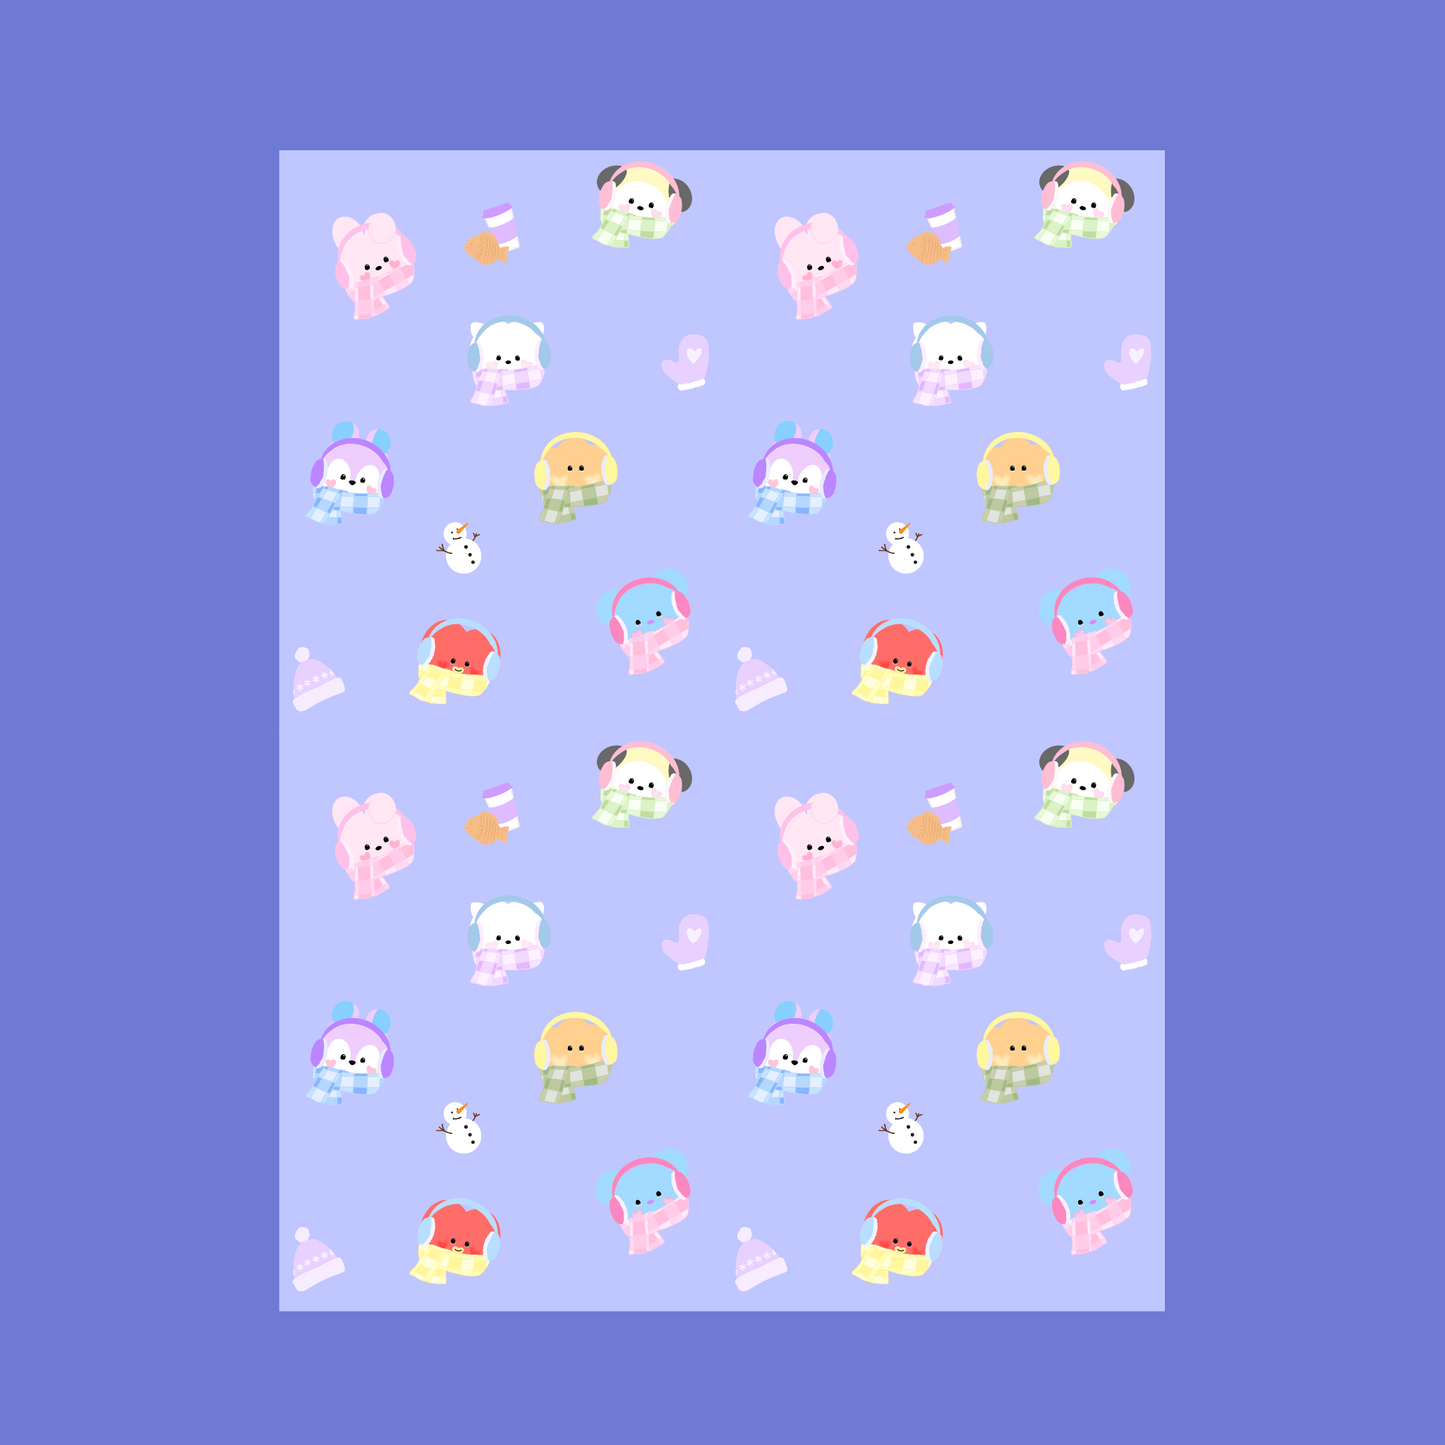 Seoul Sunny Designs Wrapping Paper & Gift Tags